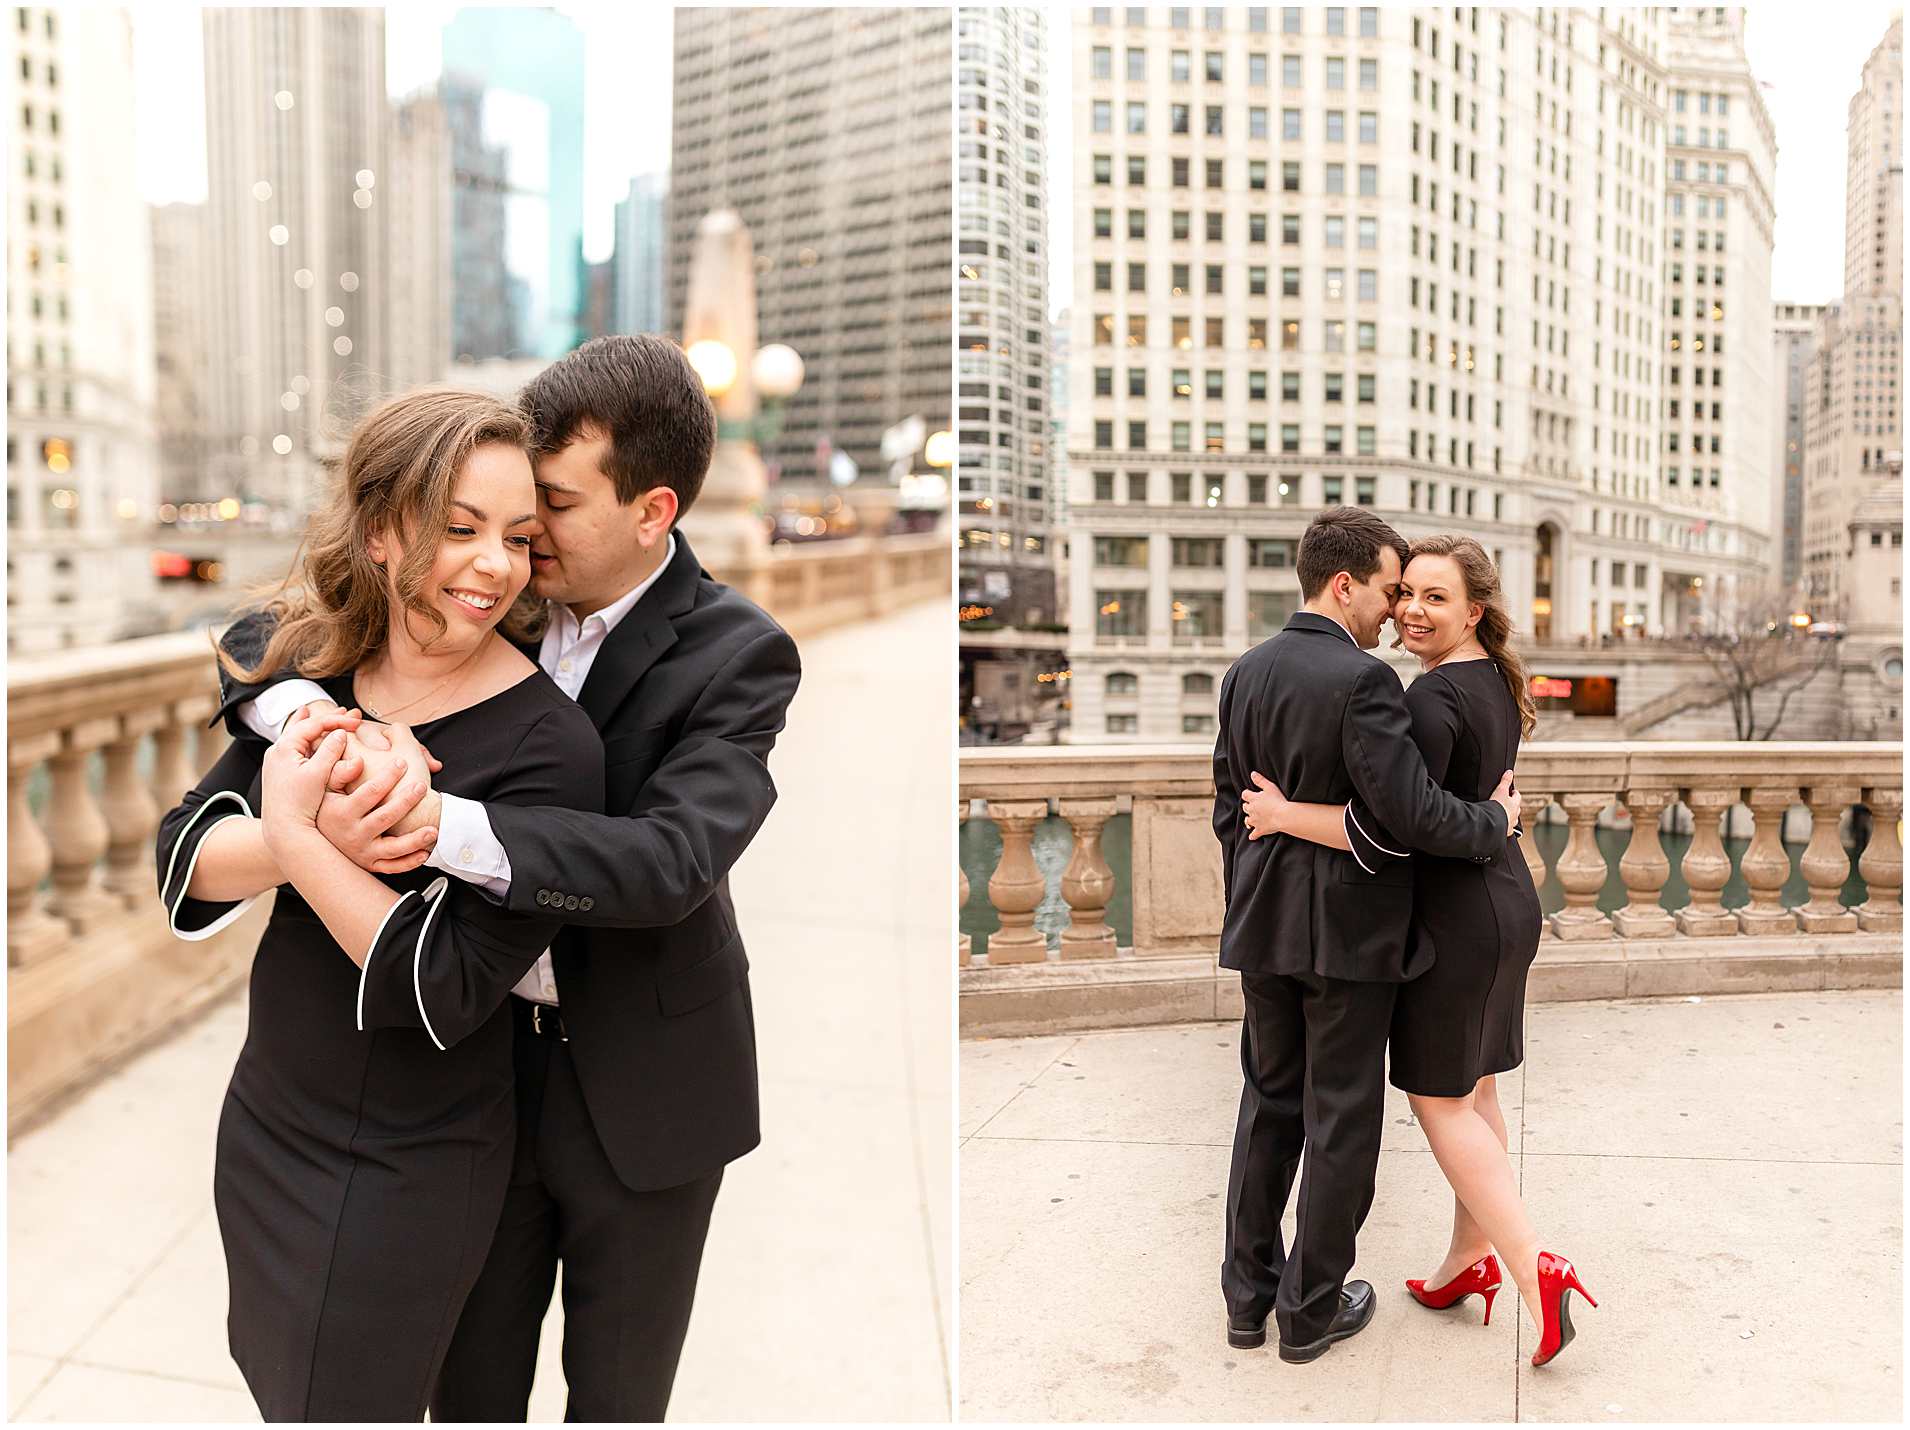 Spring Engagement Photos on Chicago Riverwalk The Wrigley Building, Formal Engagement